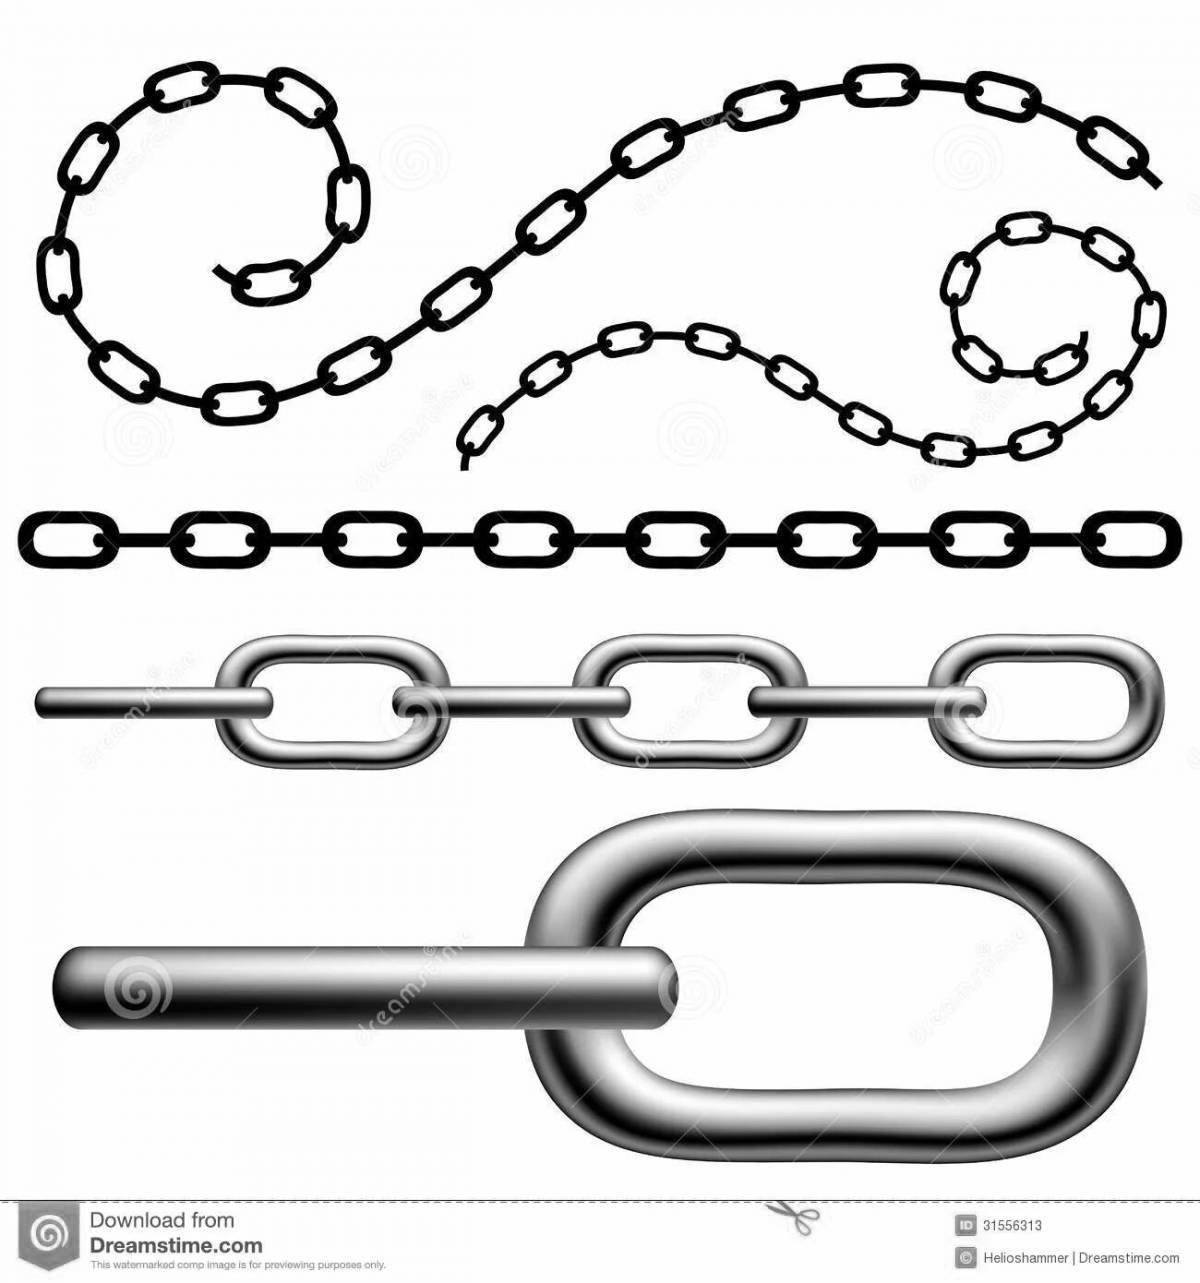 Shock chain coloring page